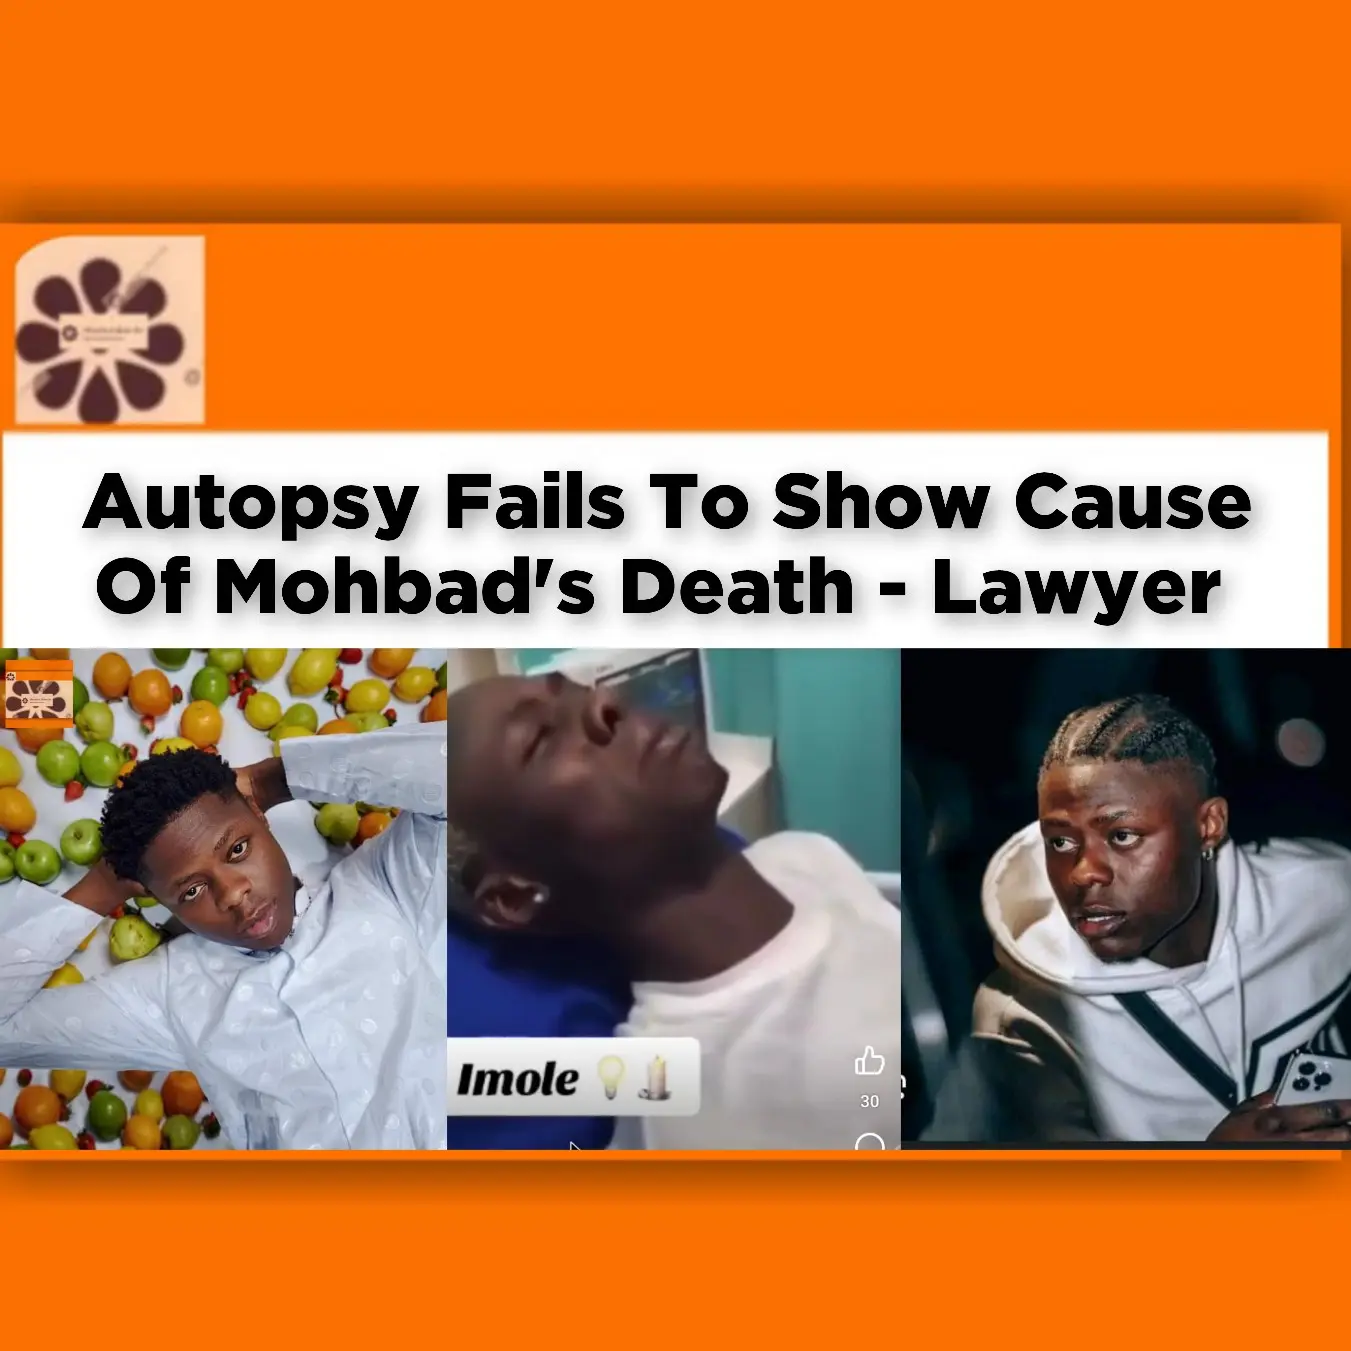 Autopsy Fails To Show Cause Of Mohbad's Death - Lawyer ~ OsazuwaAkonedo #Landlords